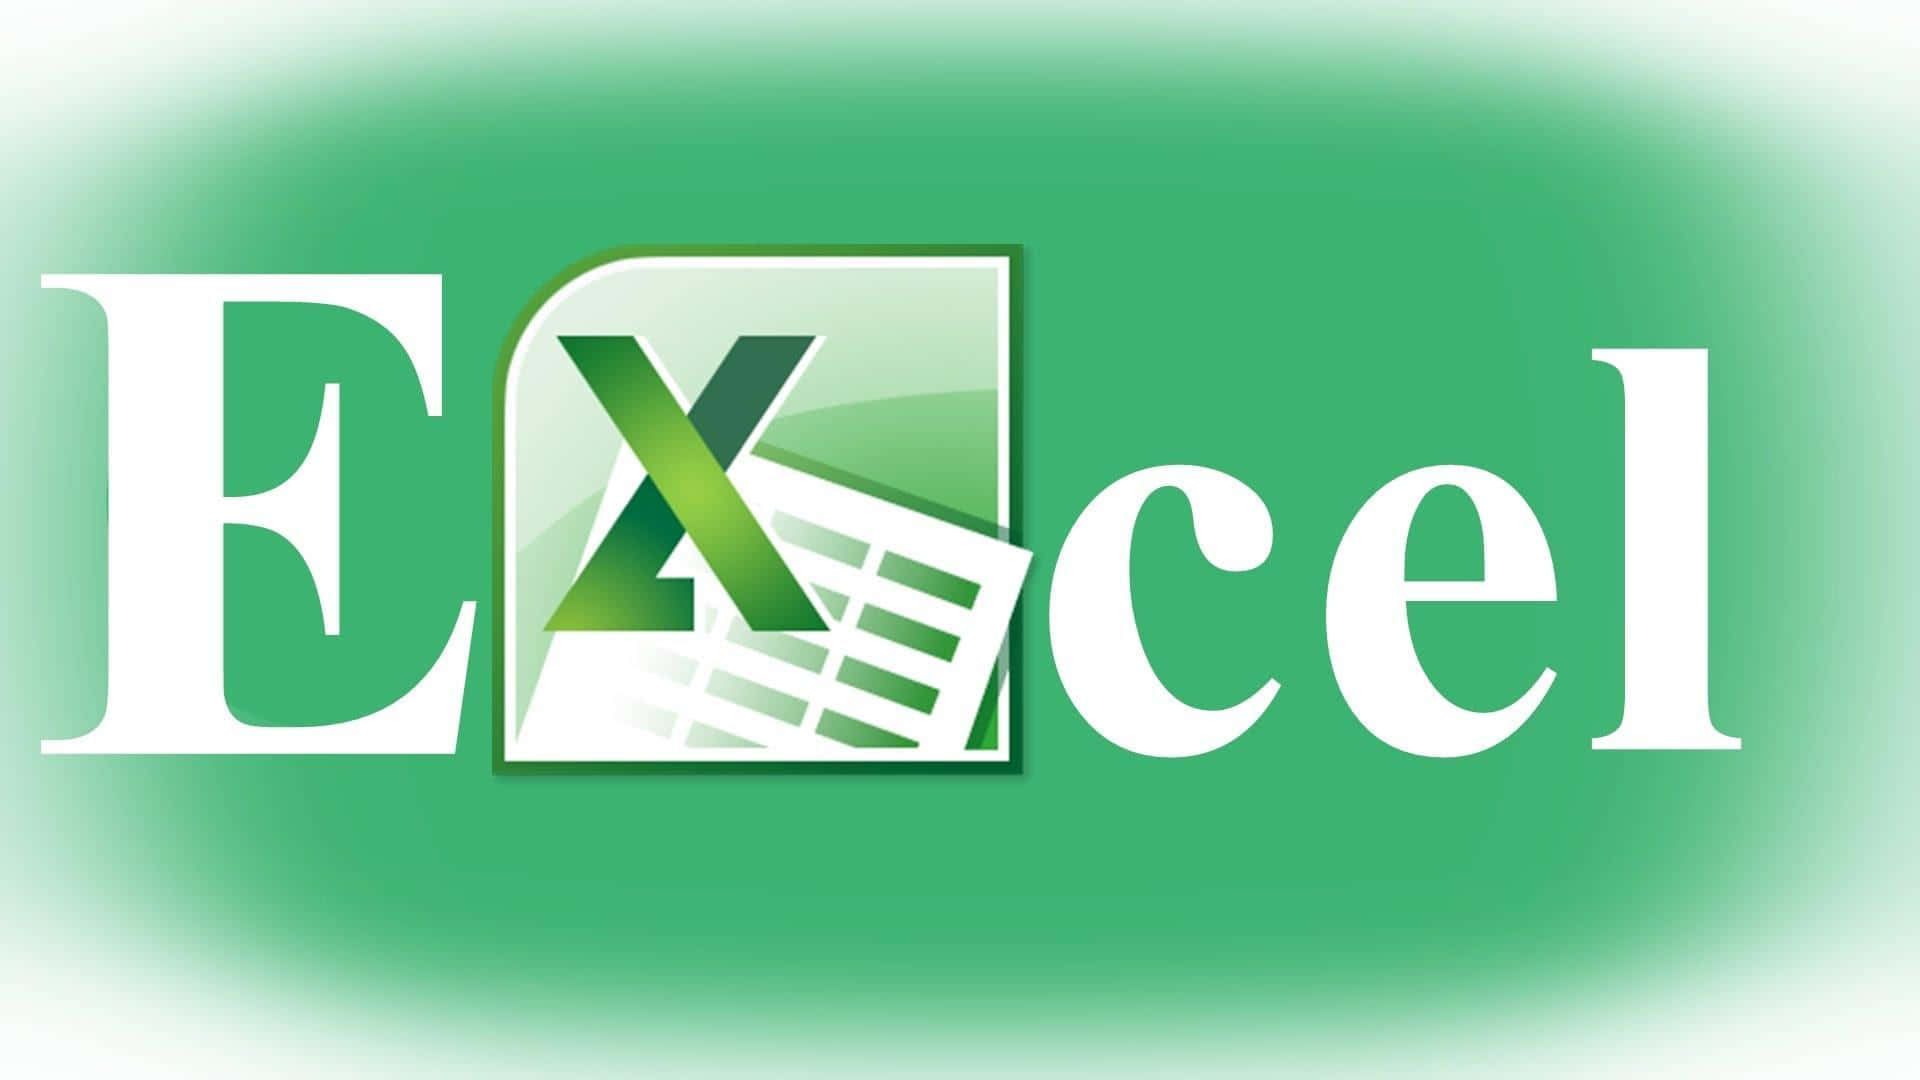 Excel Logo With A Green Background